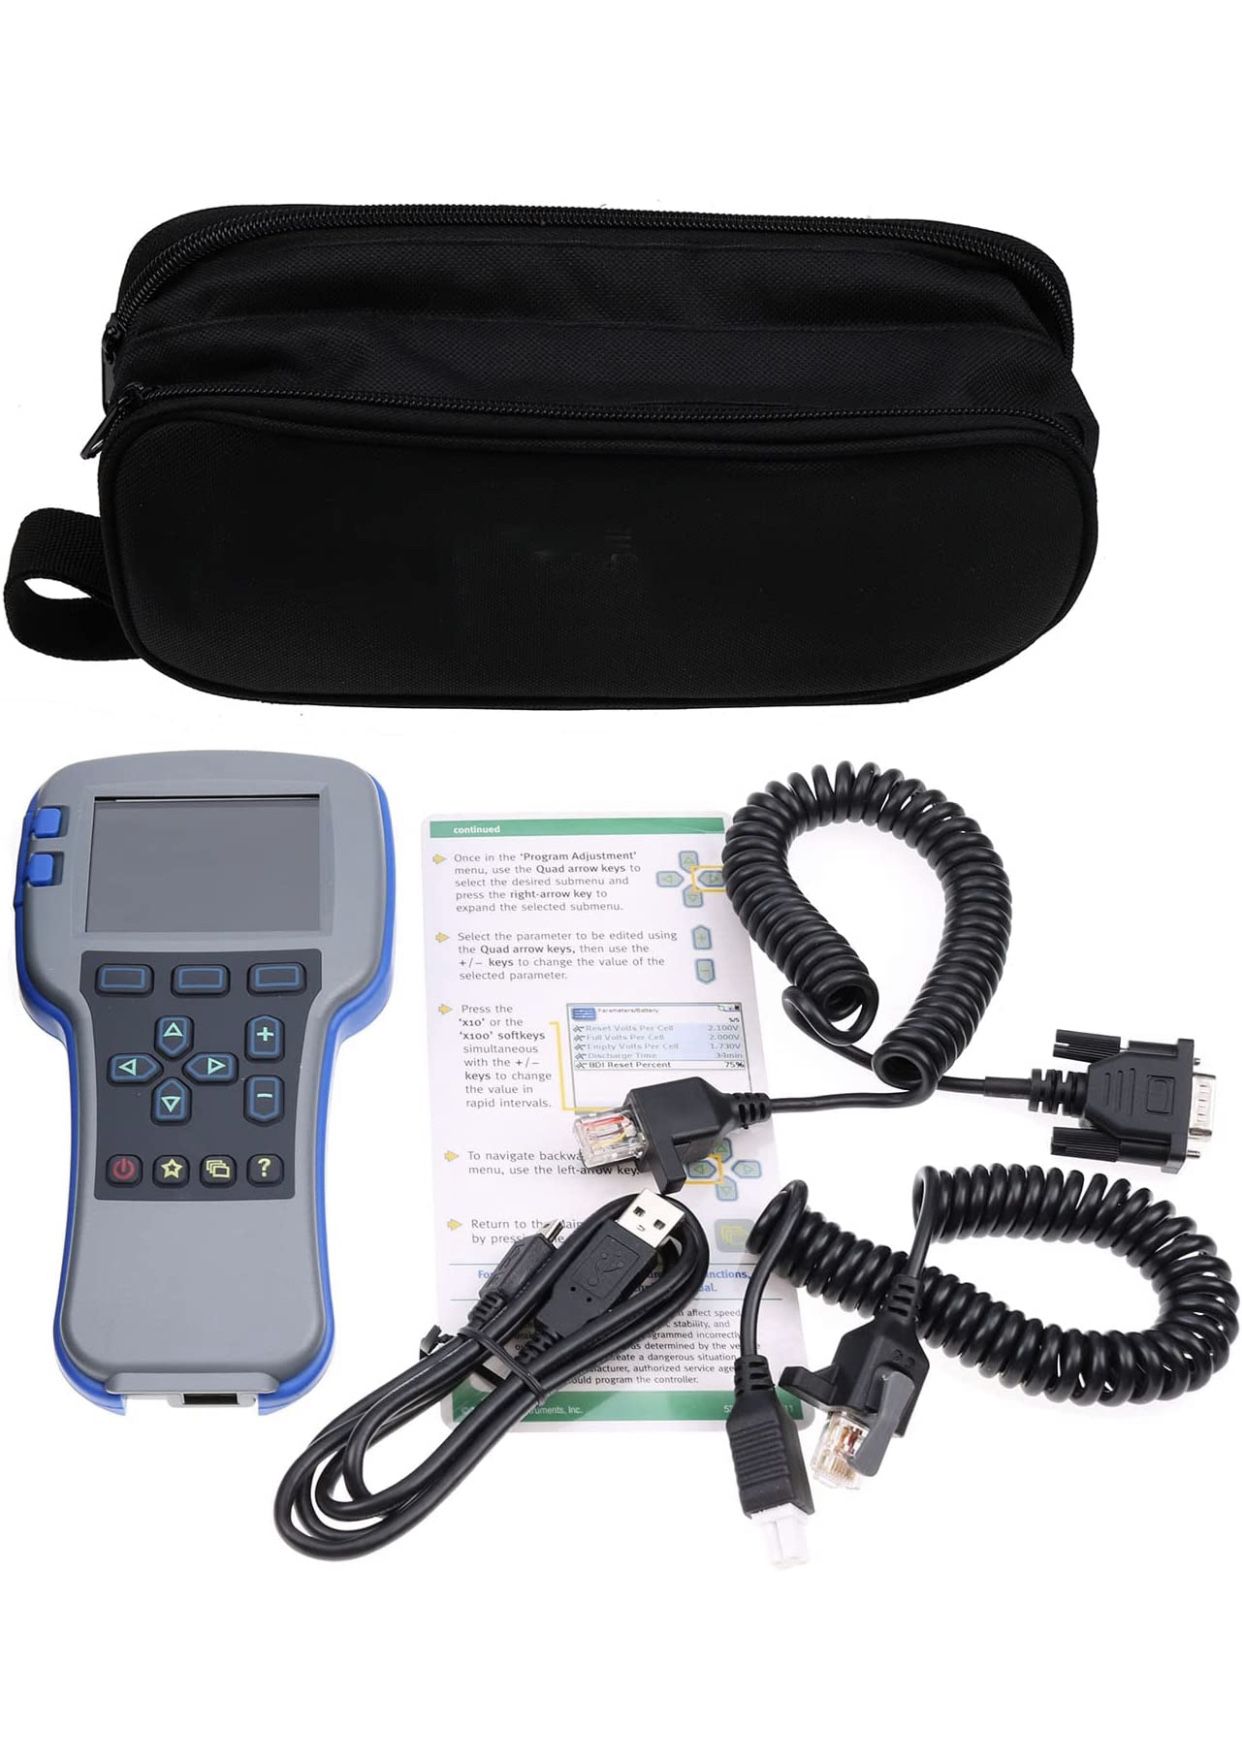 Full Function Handheld Programmer Compatible With Curtis Forklift